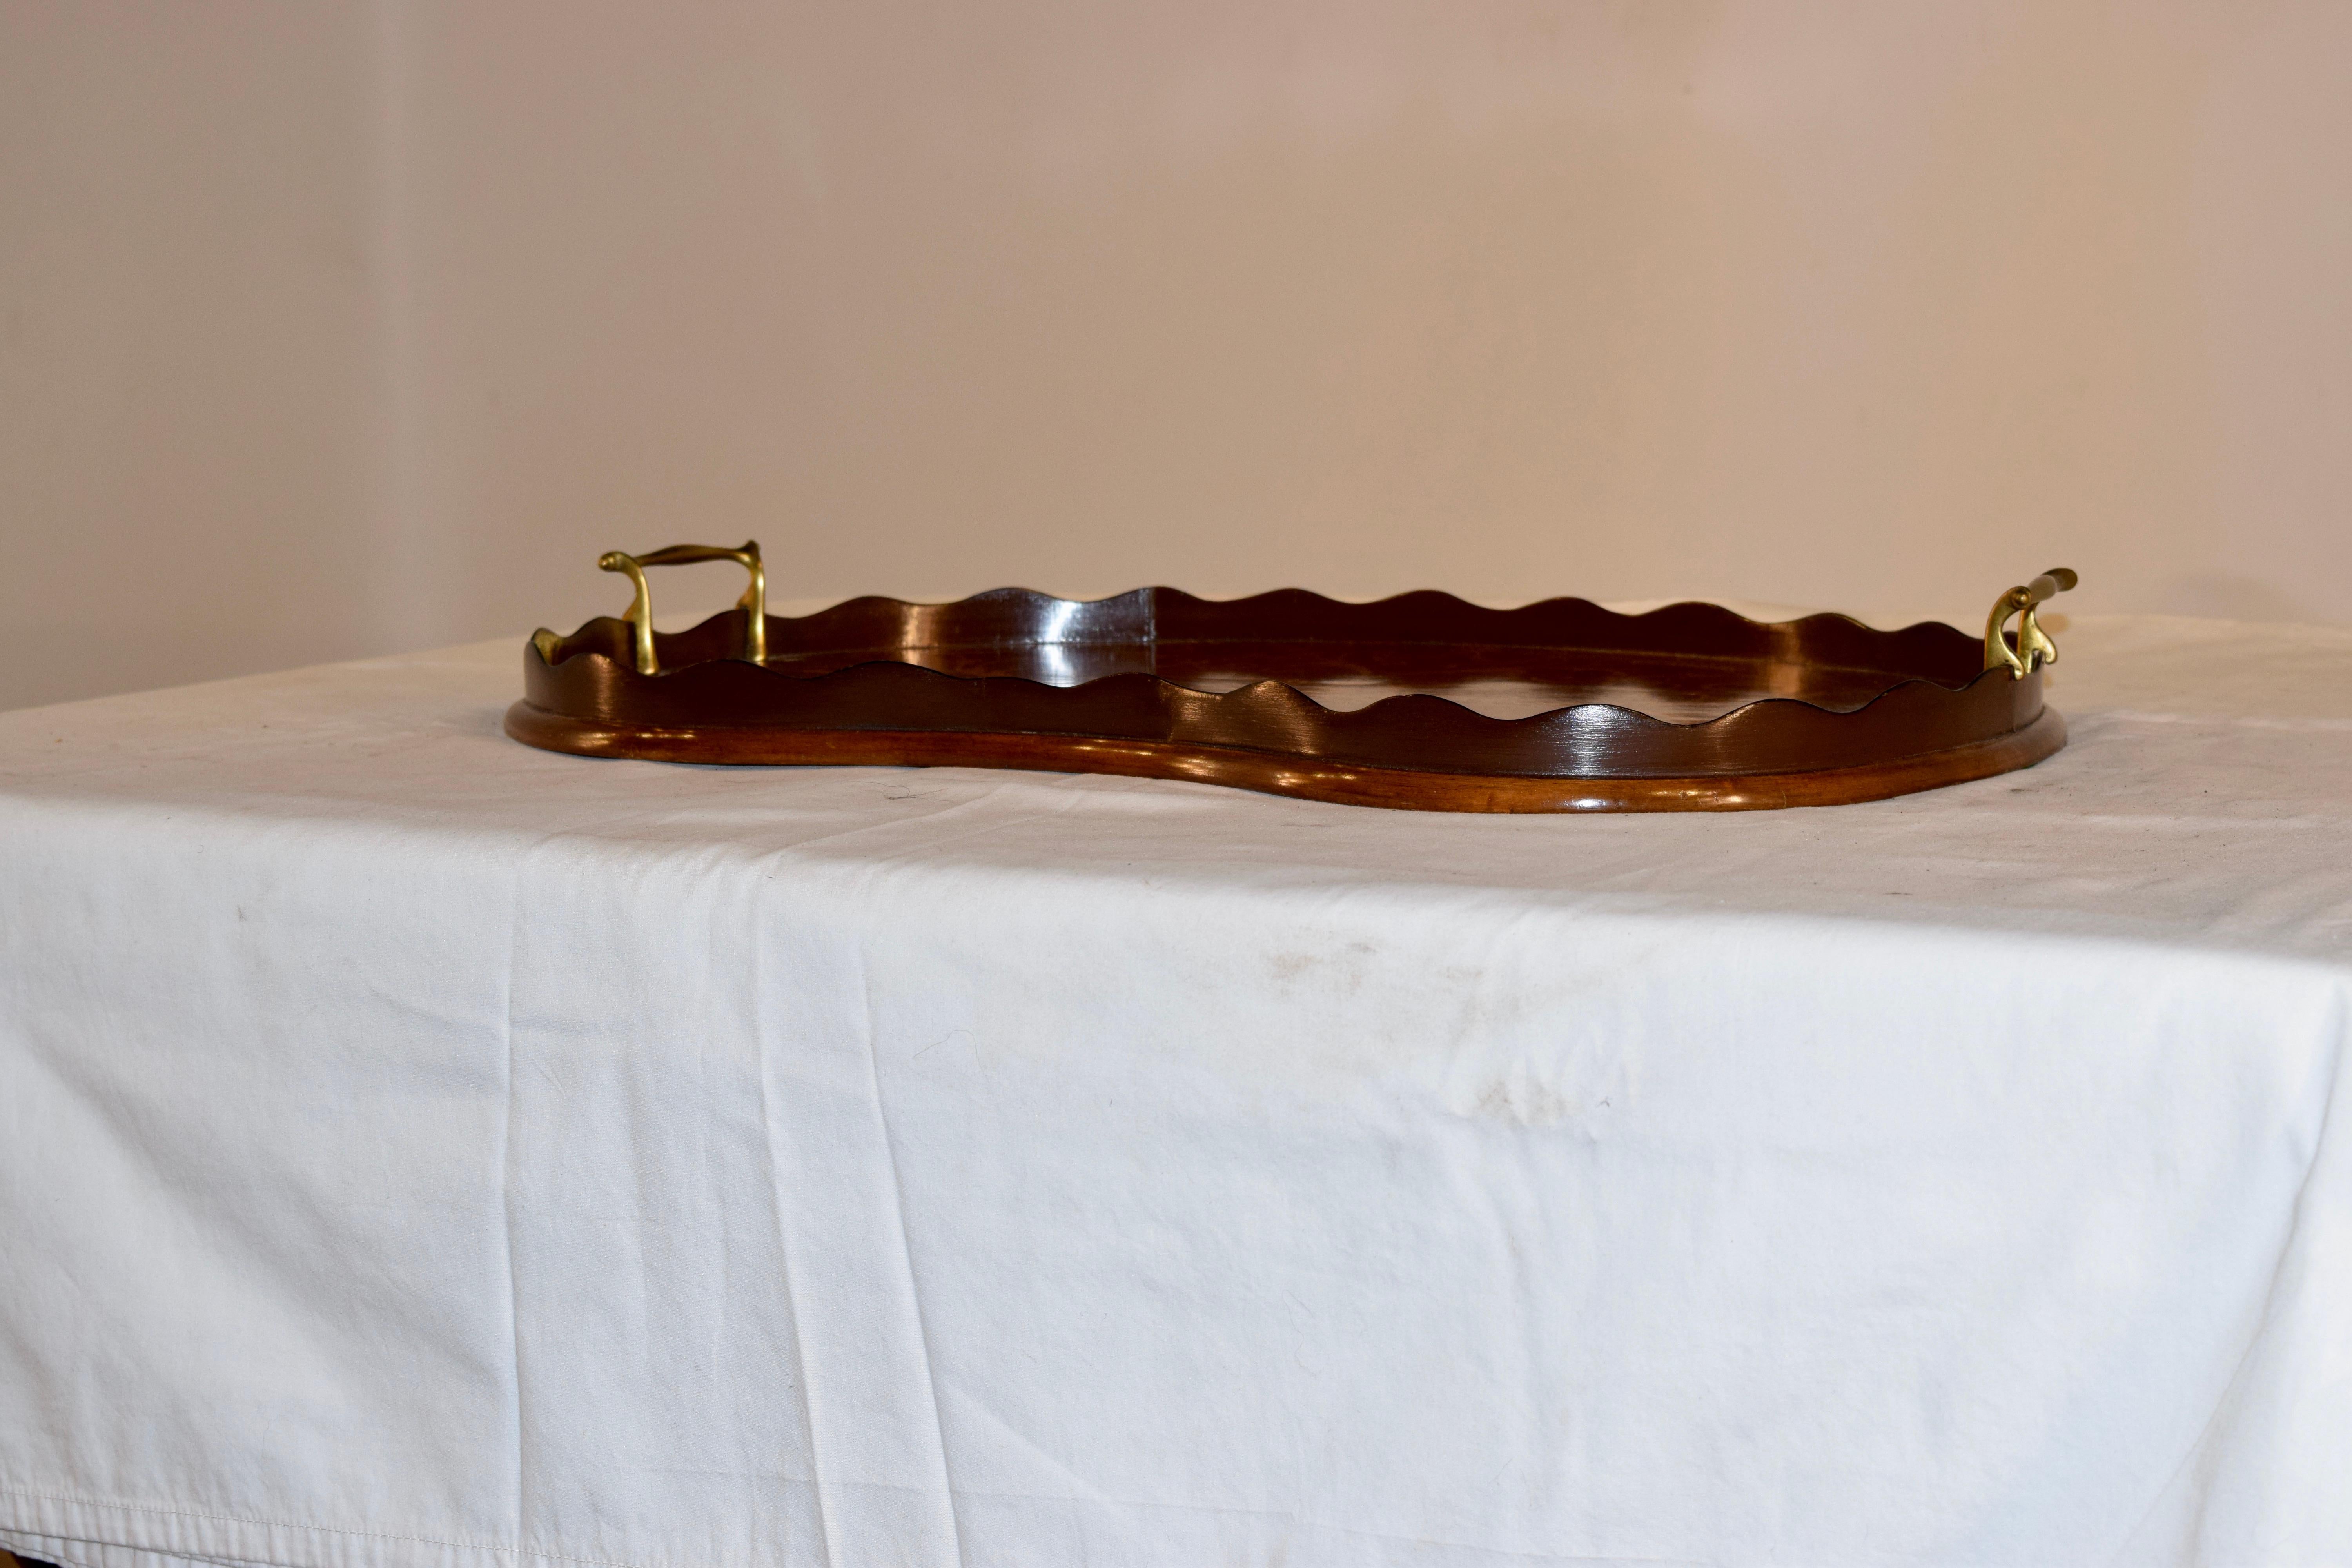 19th century wonderful quality Georgian mahogany tray with a scalloped gallery surrounding a beautifully inlaid central music design with crossed horns and surrounded by wonderfully inlaid leaves, vines and bell flowers. Flanked on either end by